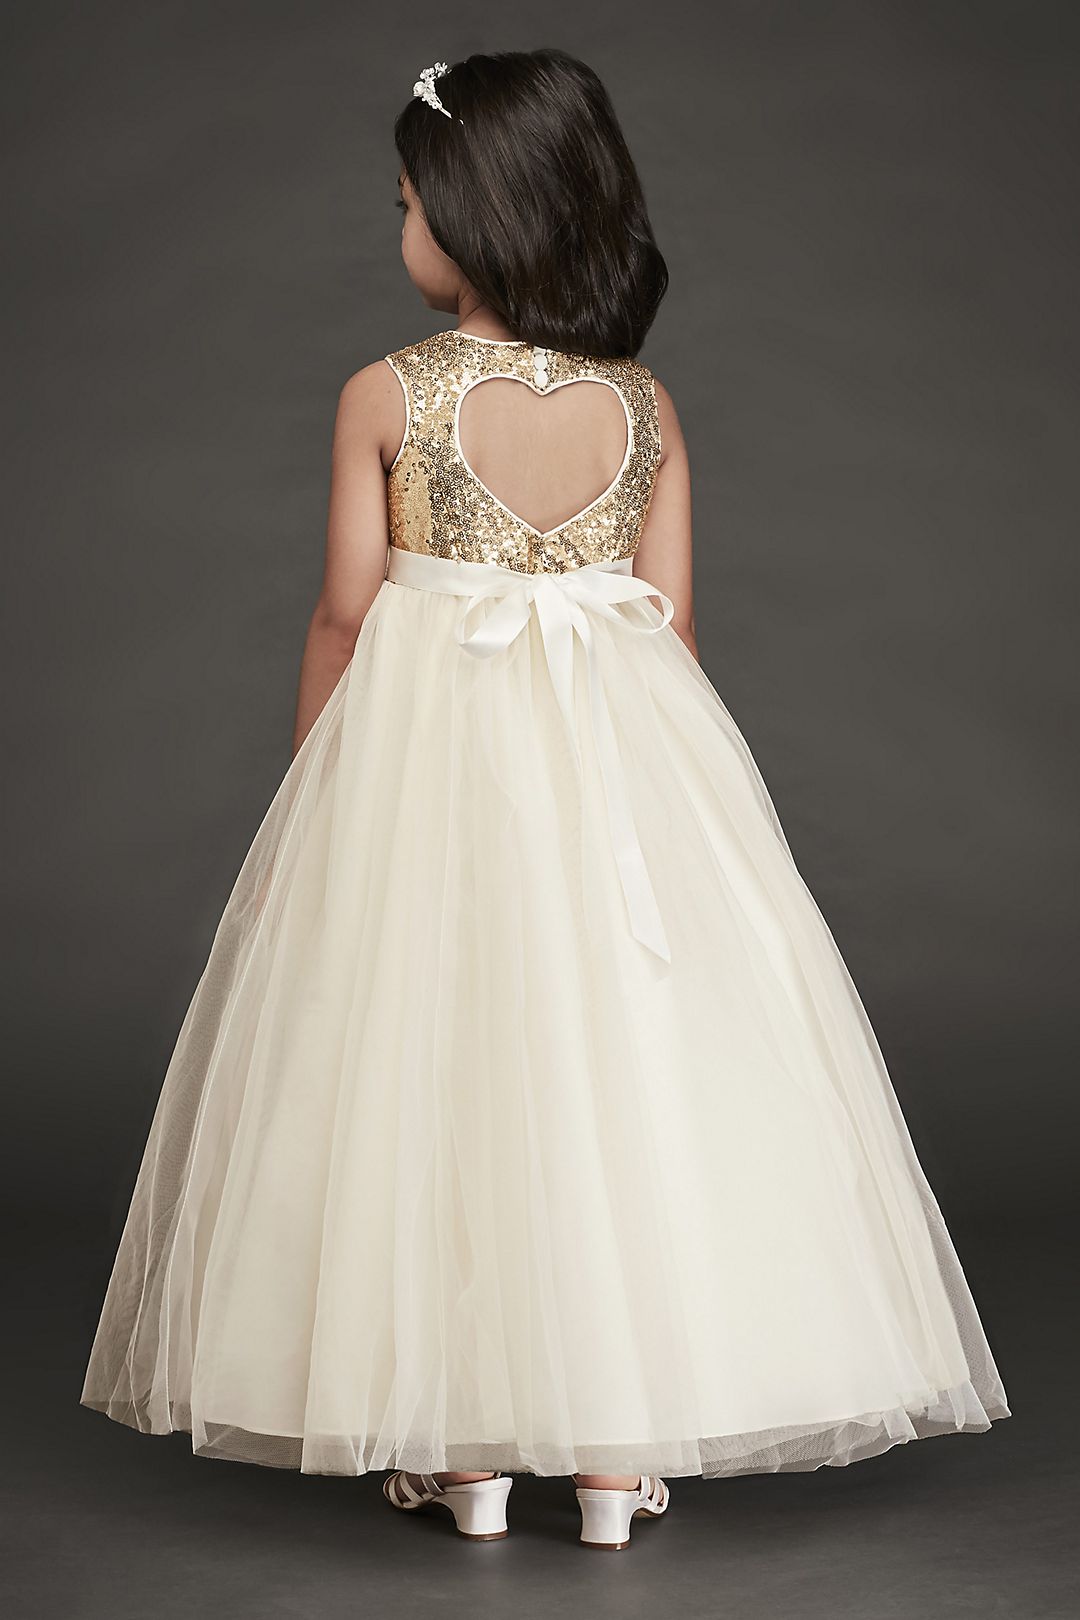 Heart Back Sequin and Tulle Flower Girl Gown Image 2